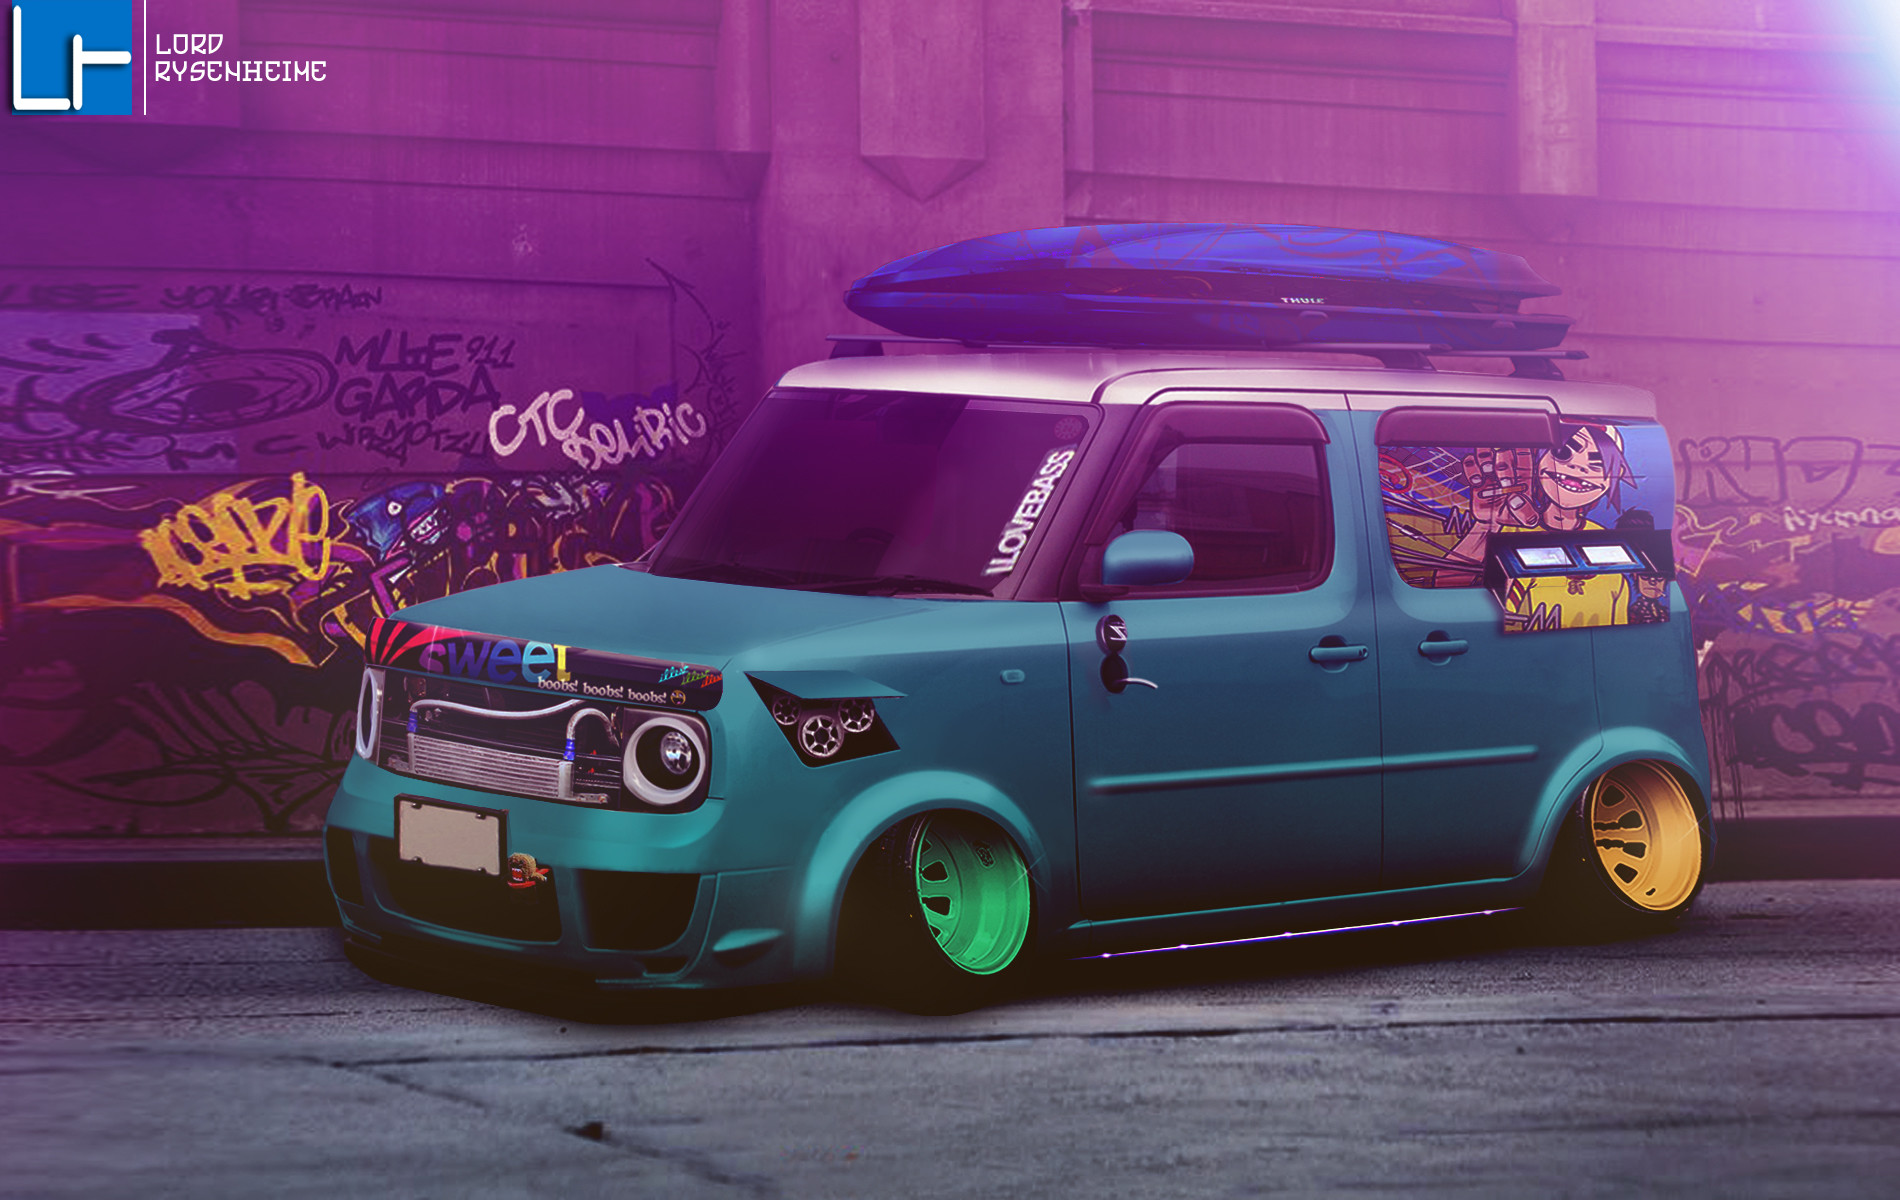 A nissan cube jdm for life version who loves bass hellaflushed slammed low ...